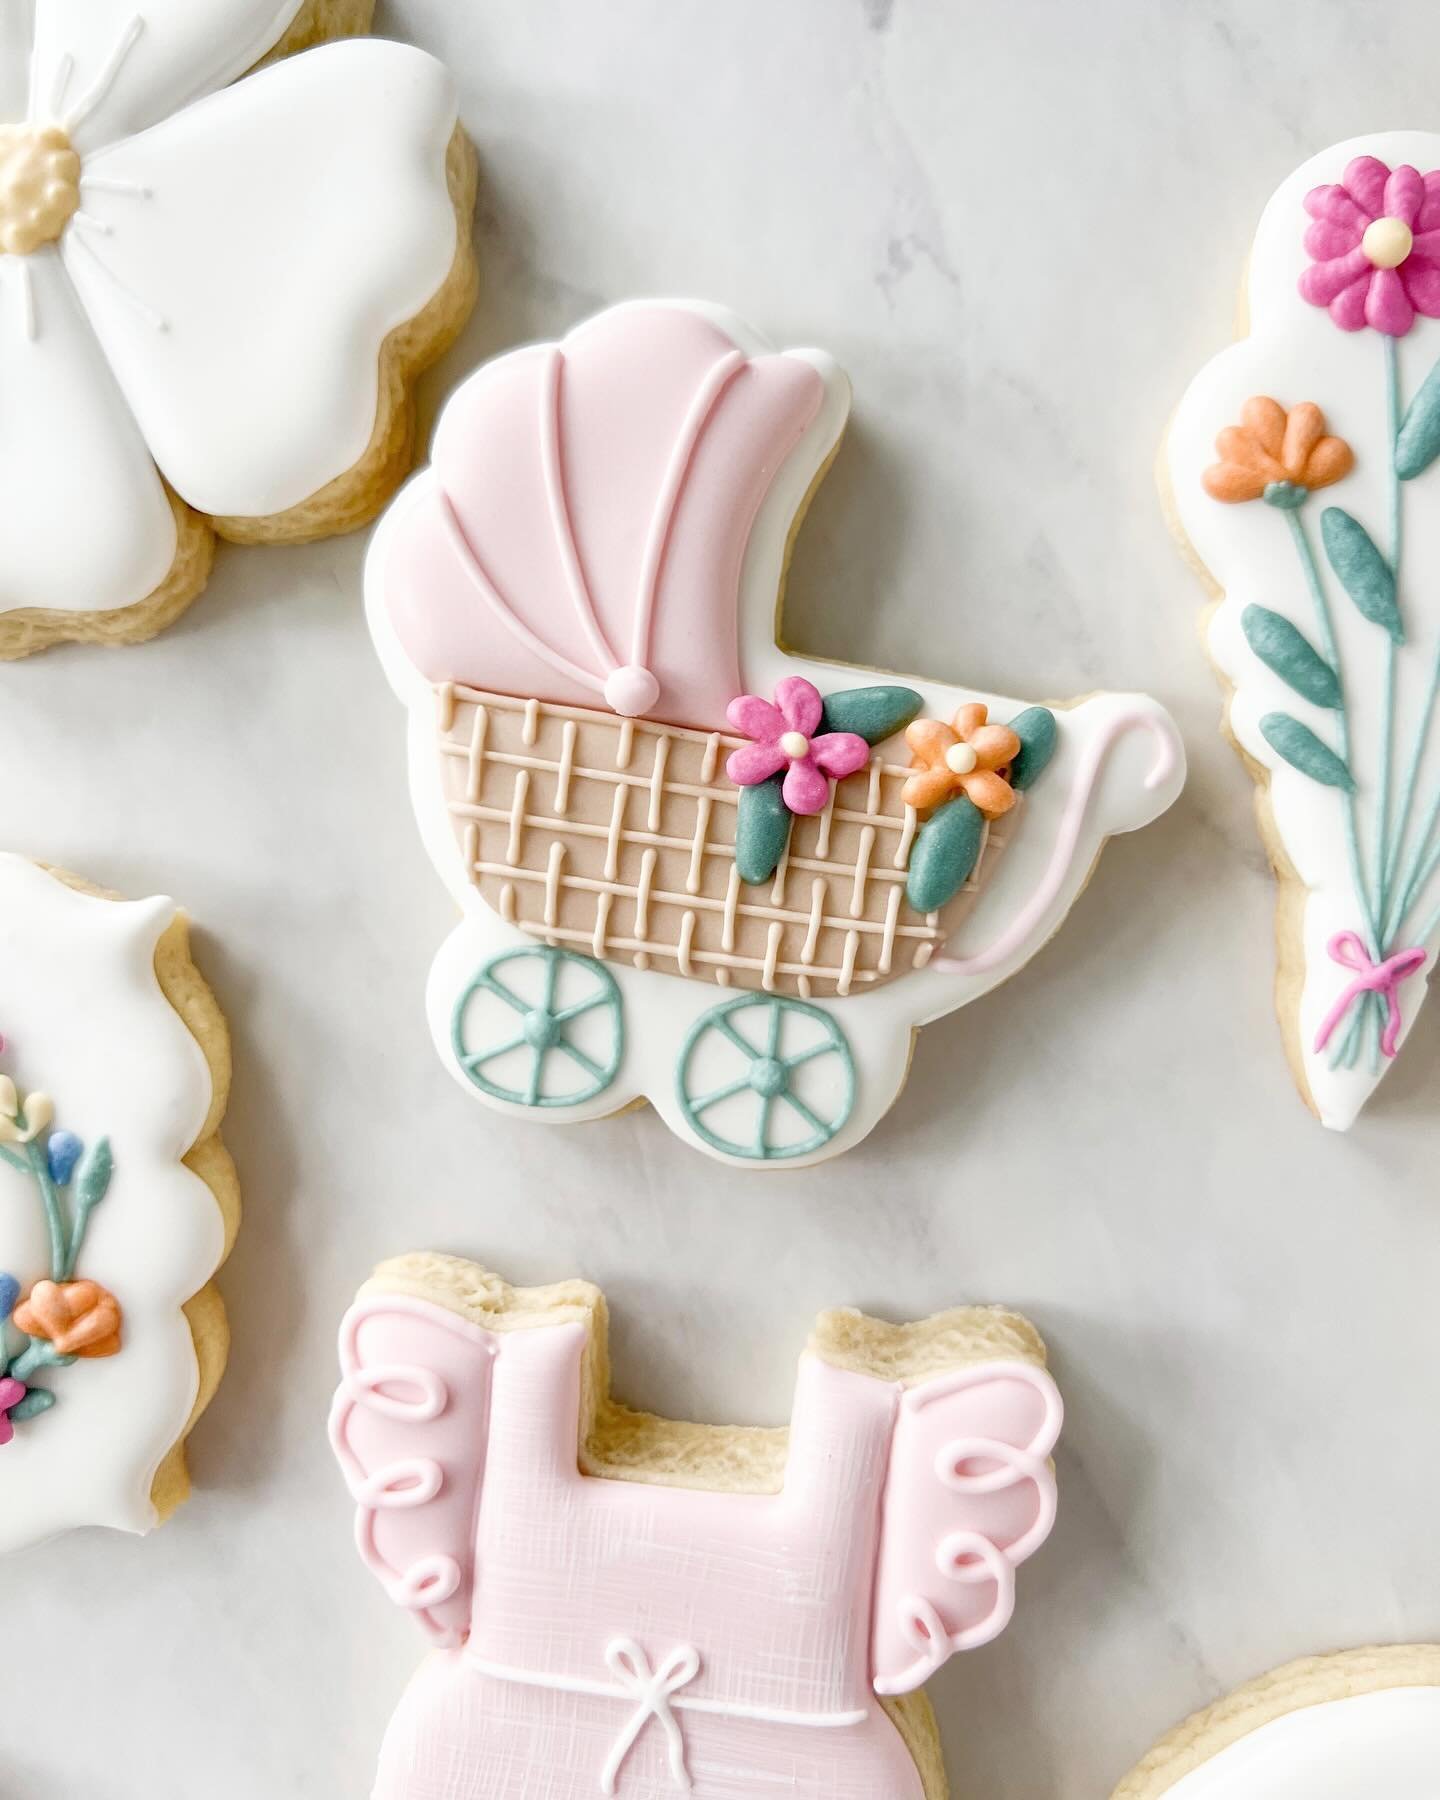 The perfect season for &ldquo;baby in bloom&rdquo; themed cookies 💐🌸🌷
&bull;
&bull;
&bull;
#babyinbloom #babyshower #babyshowercookies #babyshowerideas #babyinbloom #floralcookies #flowercookies #springtheme #babyshowertheme